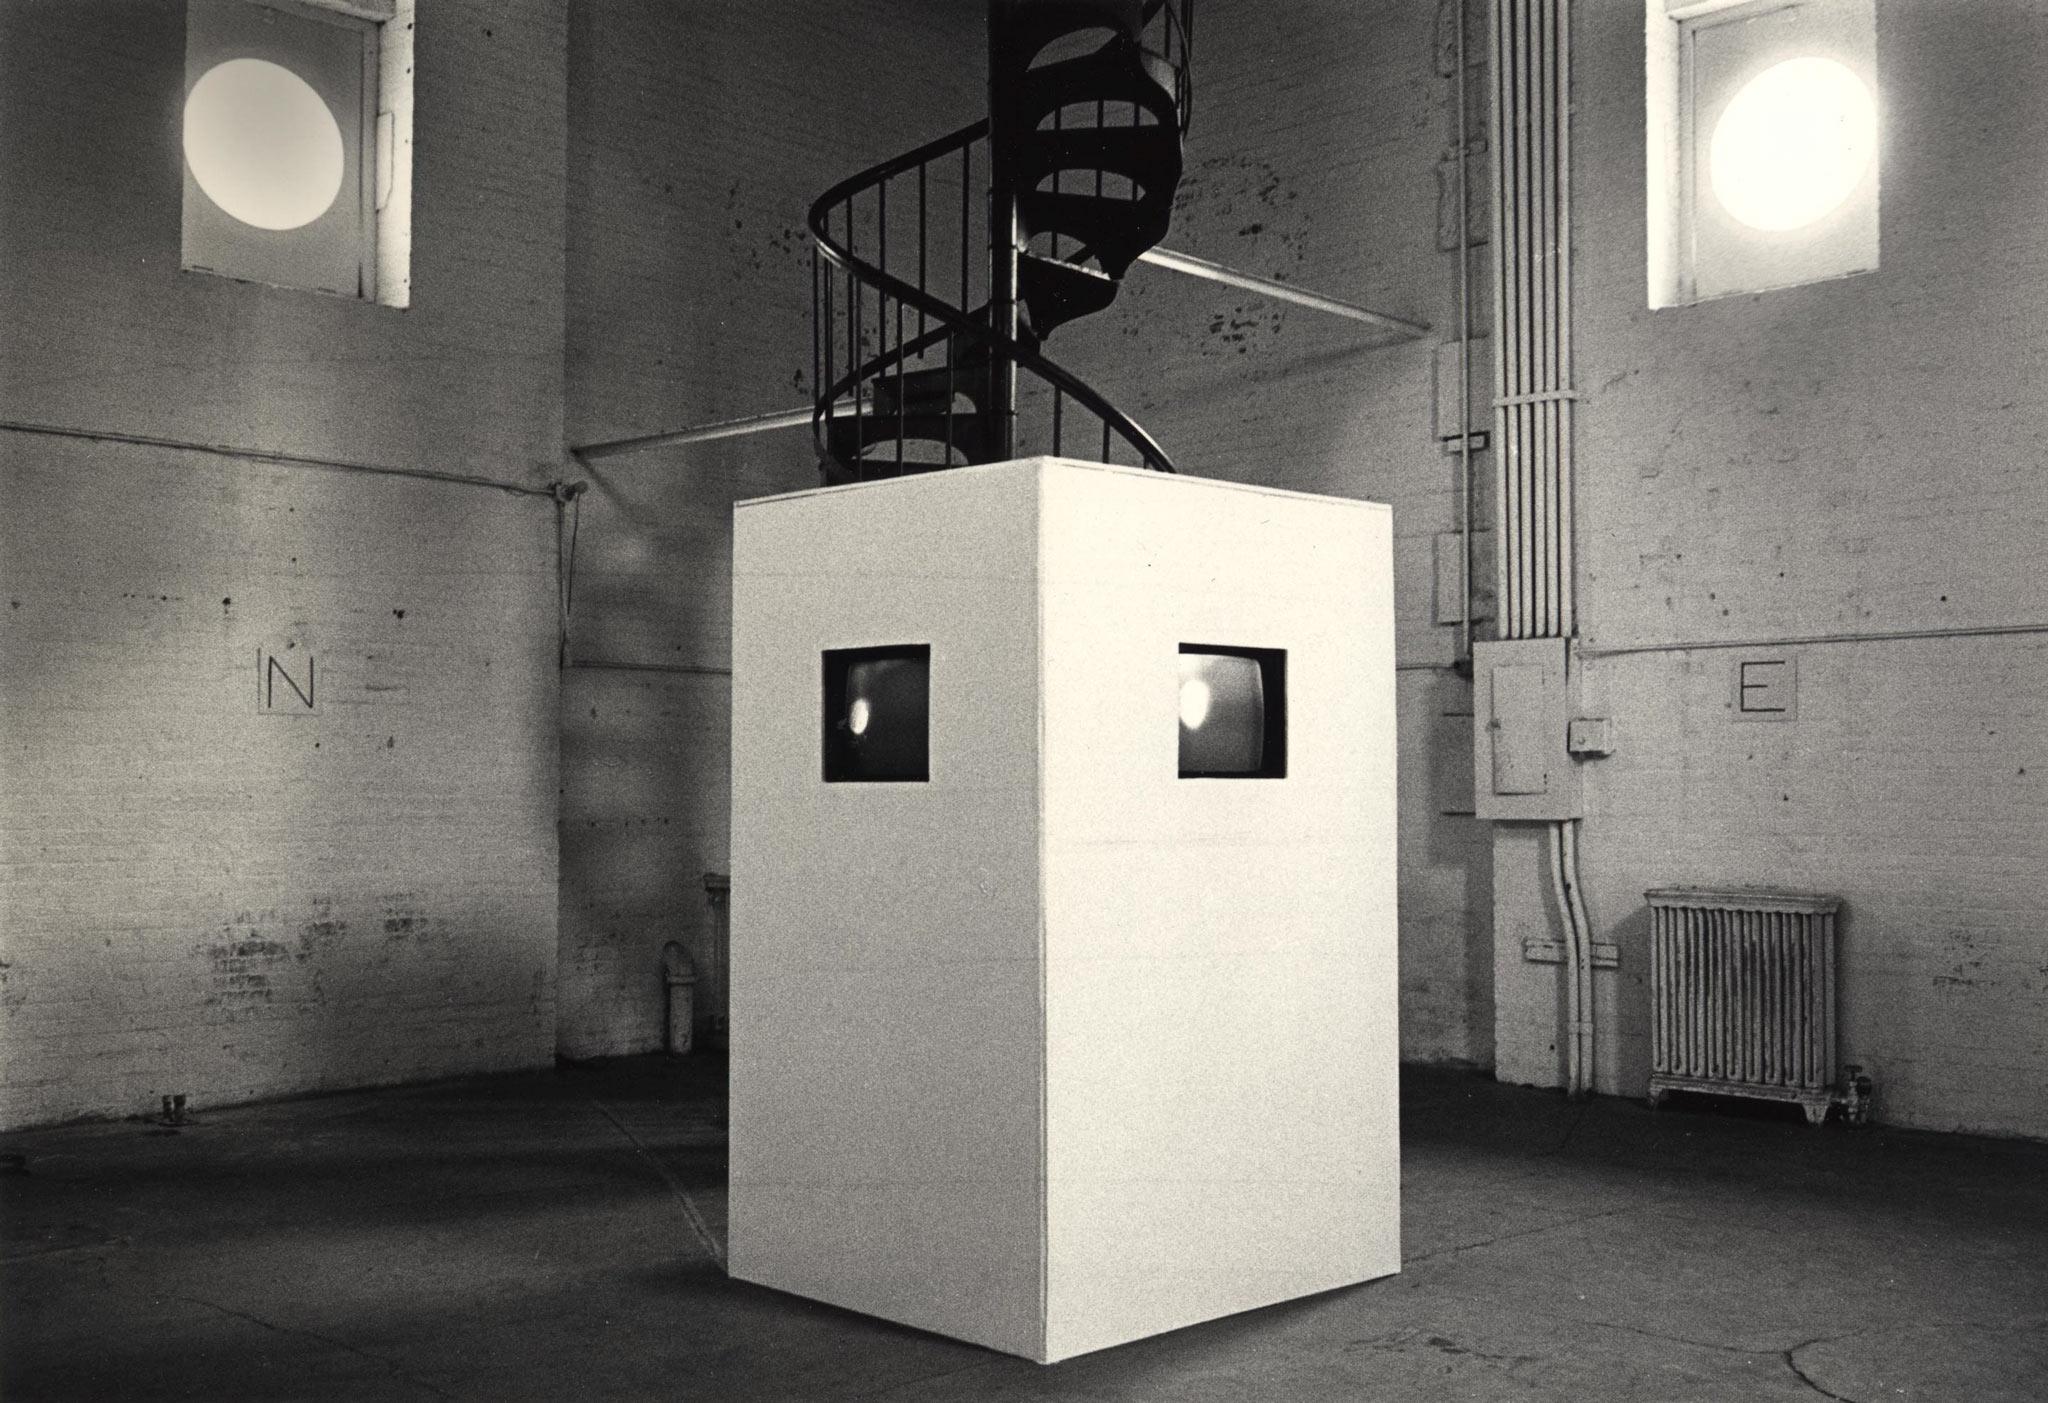 a white box with two screens in embedded inside sits in the center of a white brick room with a spiral staircase at the back and two high windows.